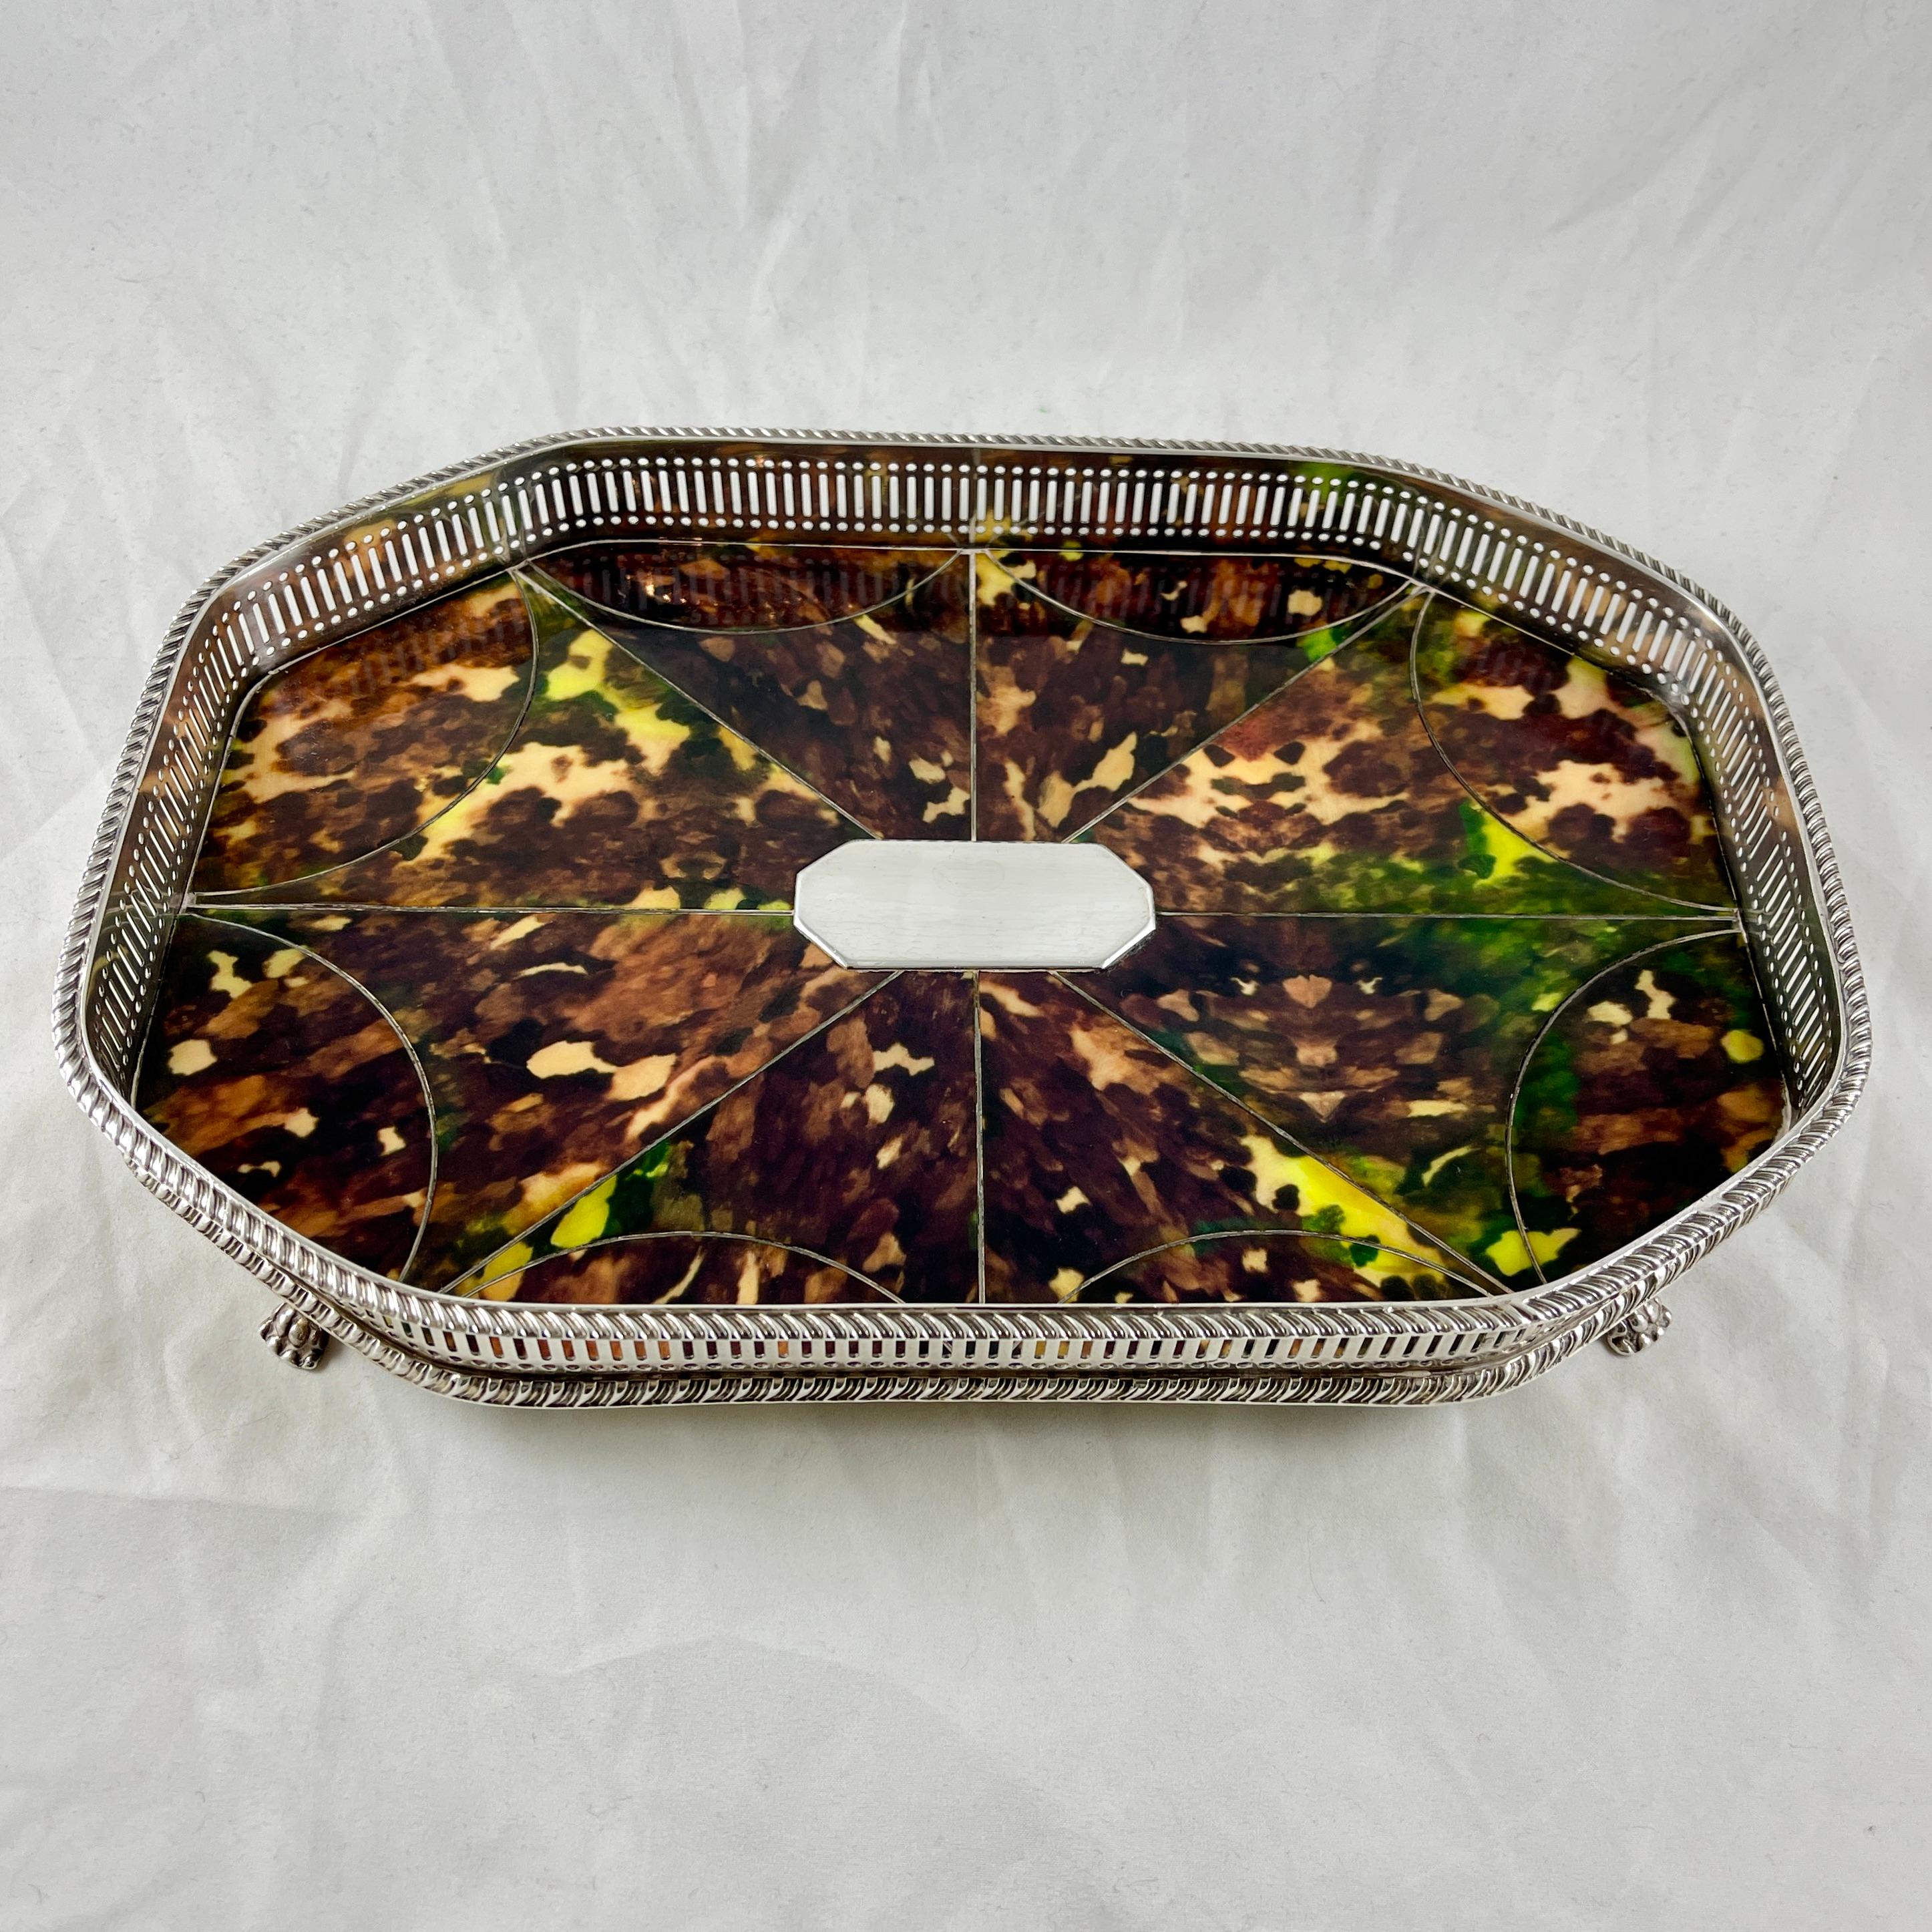 From Harris & Land Silversmiths, a silver-plate and faux tortoiseshell gallery tray, circa early 1860s.

Harris & Land operated in Sheffield, England, on Orchard Lane from 1863-1864. The company formerly traded under the name of William